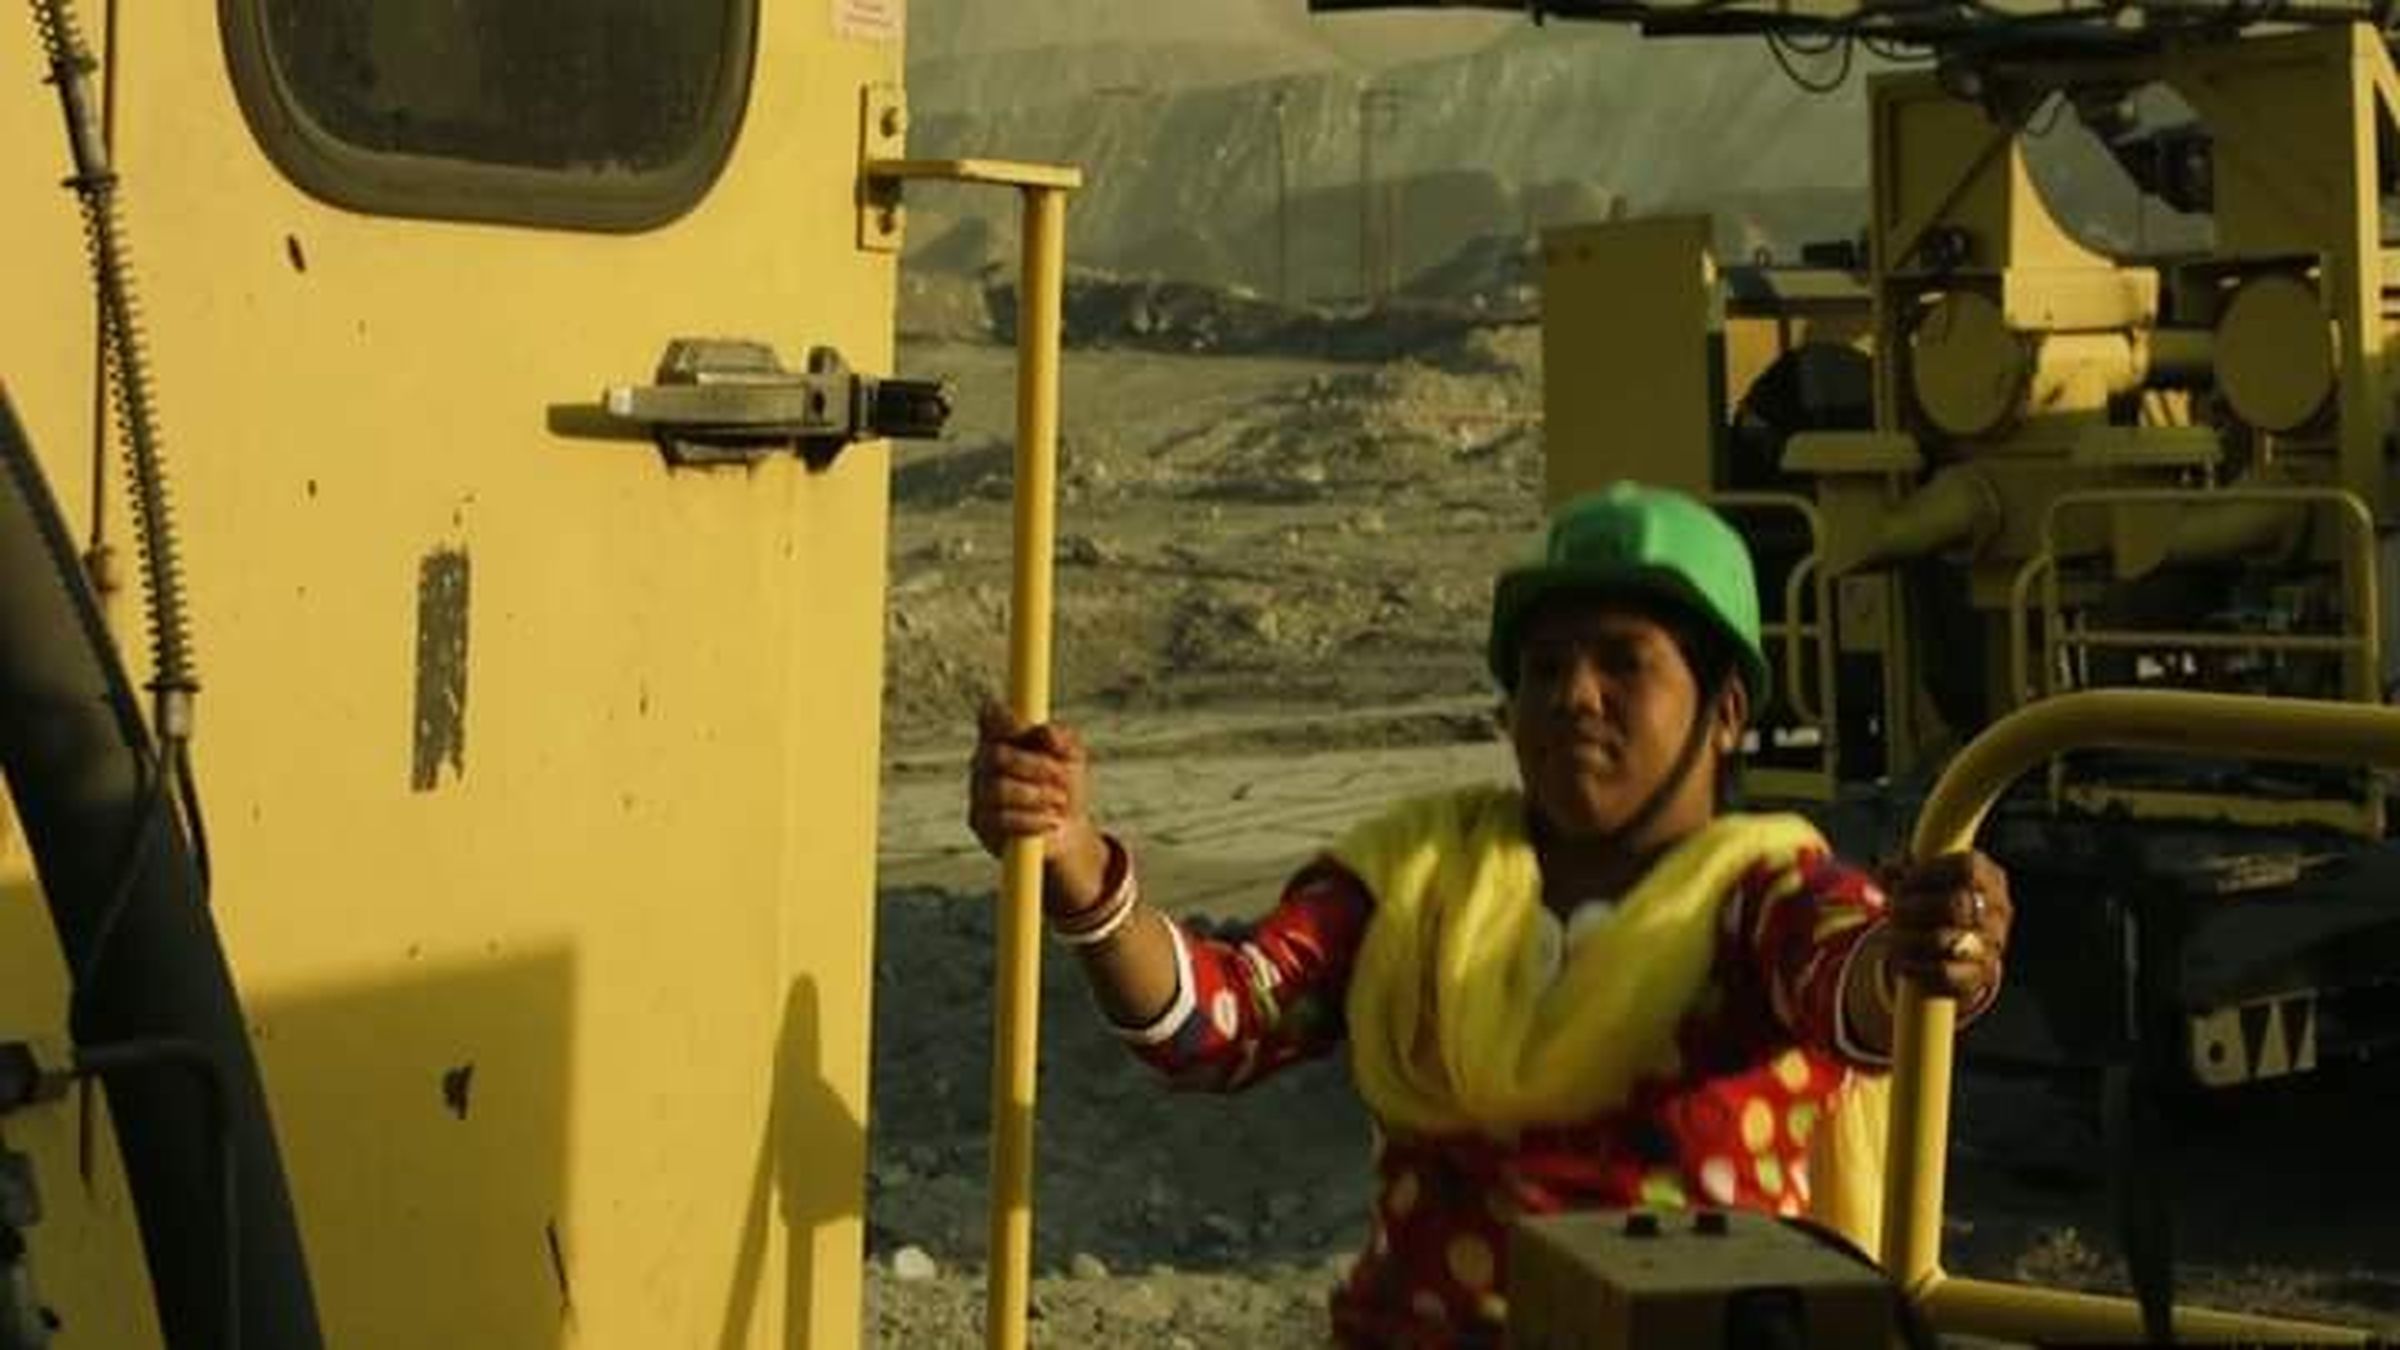 Women employees operating drill machine in the coal mine